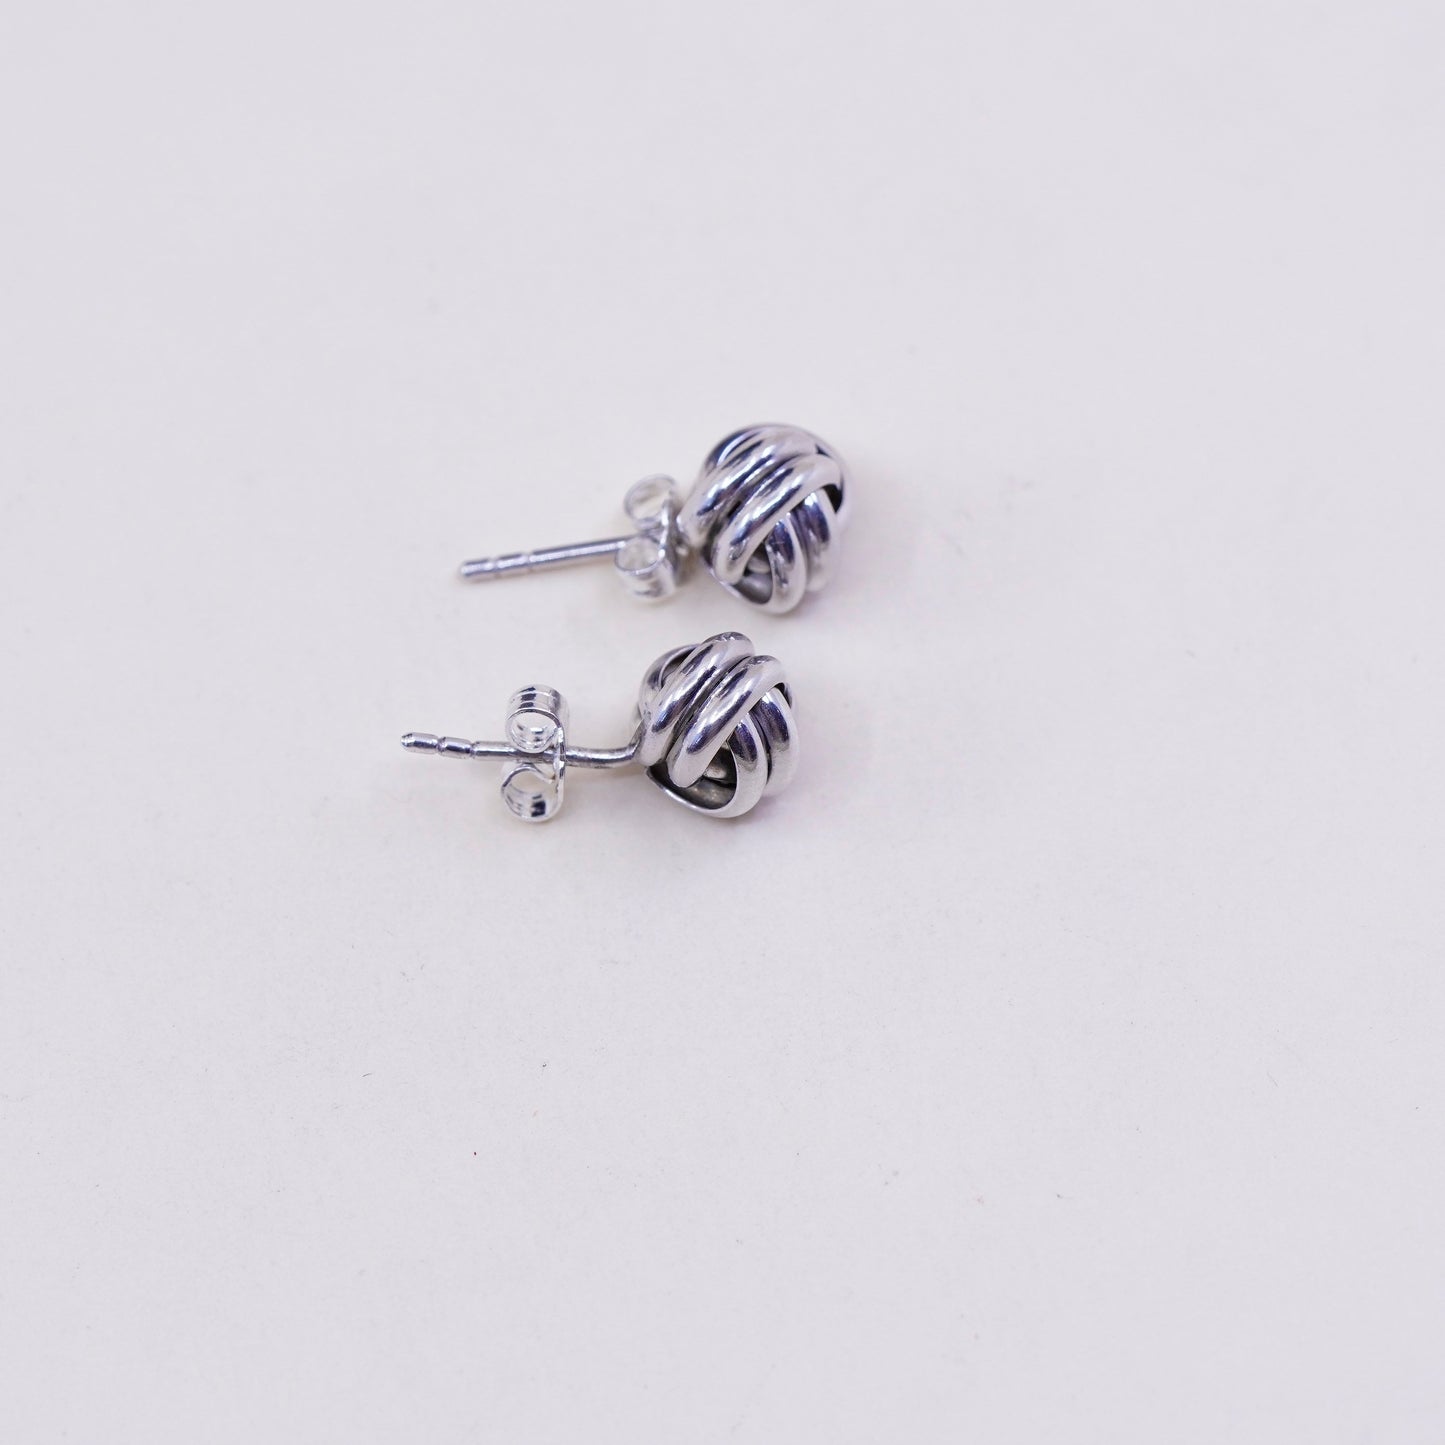 Vintage Sterling silver handmade earrings, Entwined cable studs